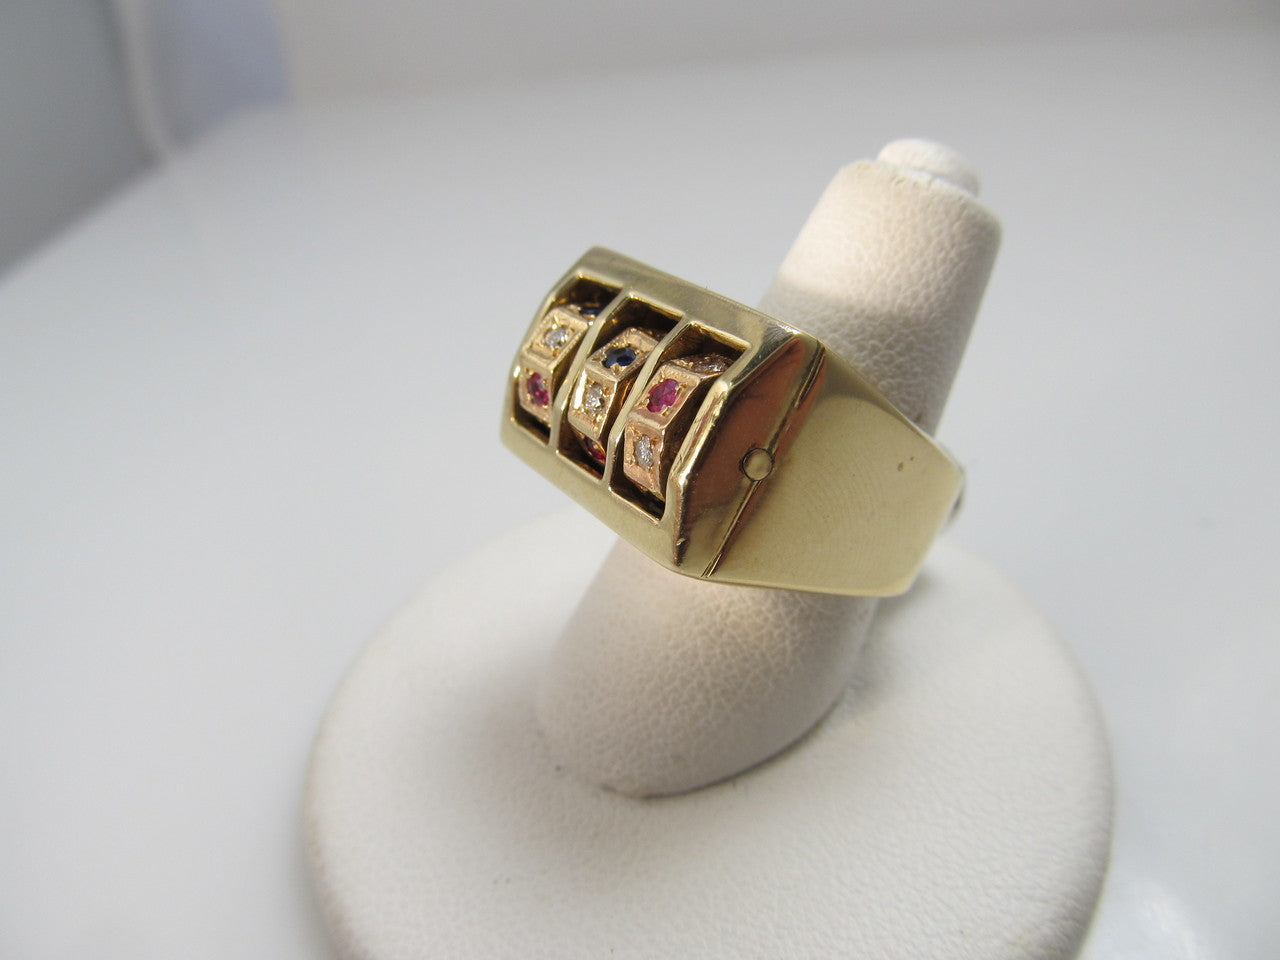 14k yellow gold "slot machine" style ring with ruby, sapphire and diamonds.